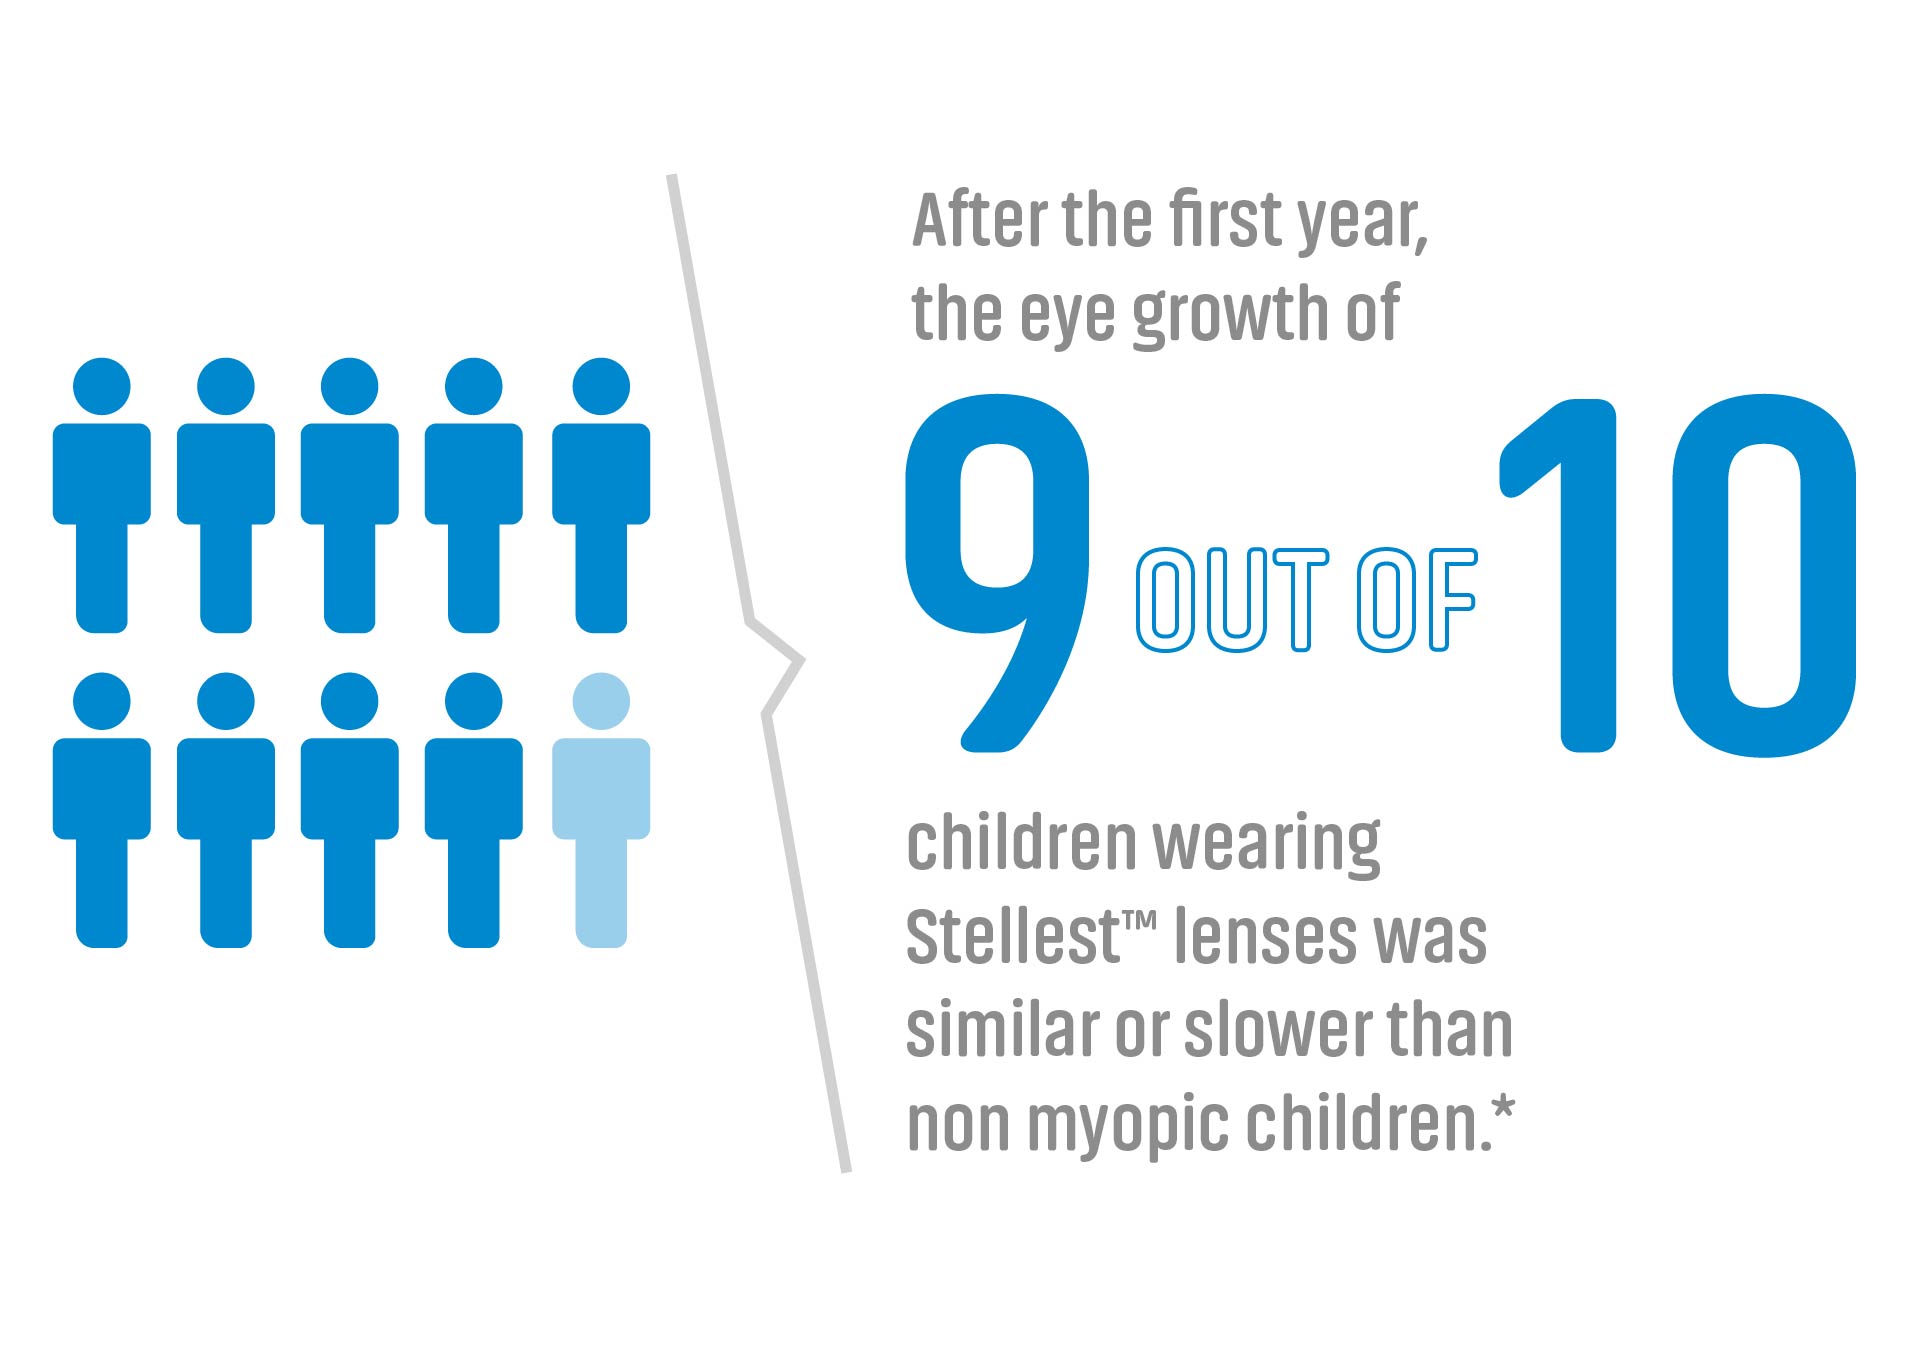 After the first year, the eye growth of 9 out of 10 children wearing Stellest lenses was similar or slower than non myopic children.